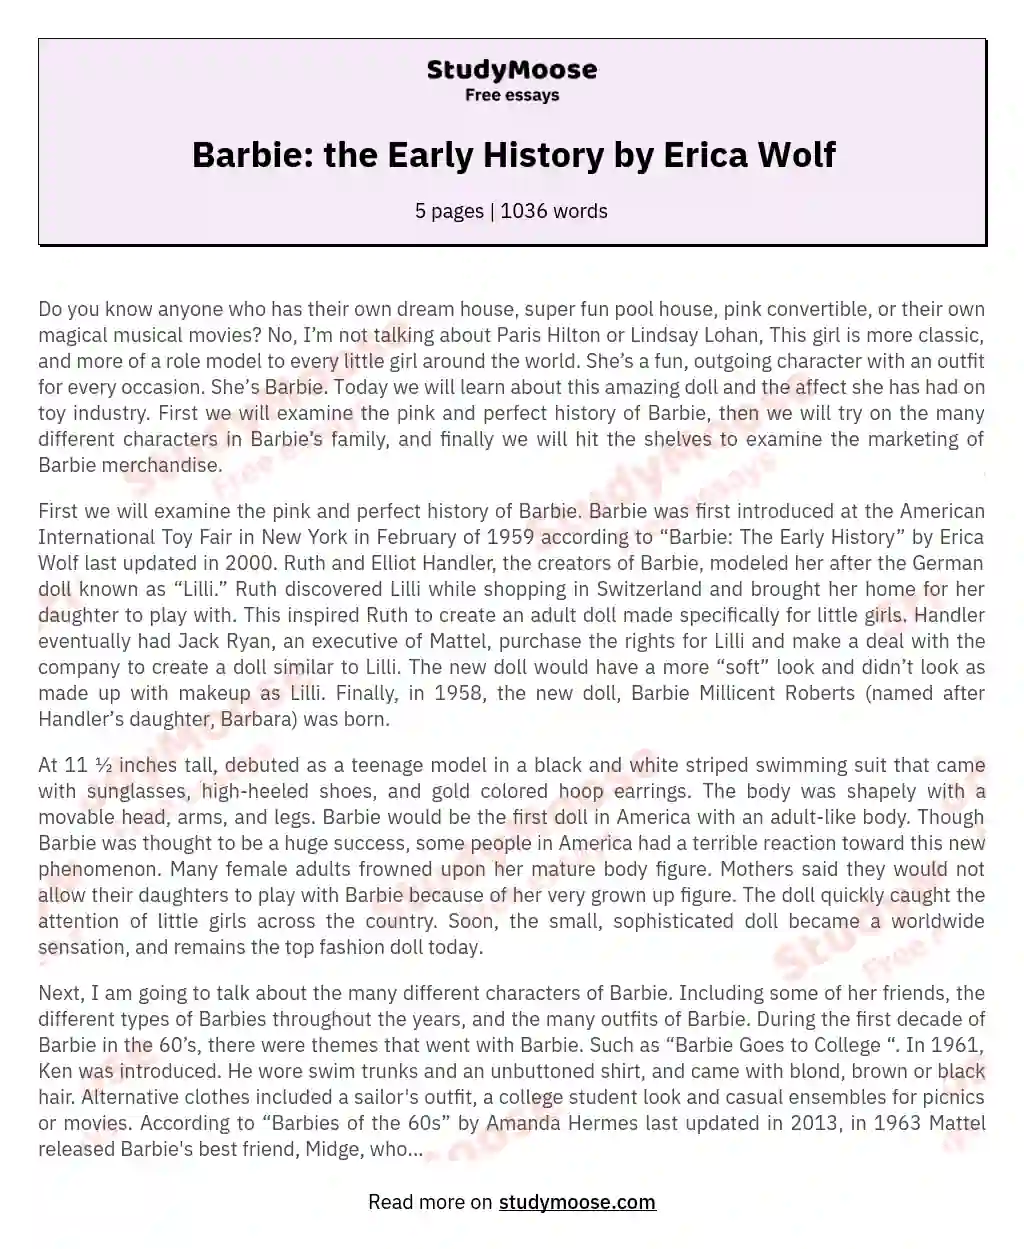 Barbie: the Early History by Erica Wolf